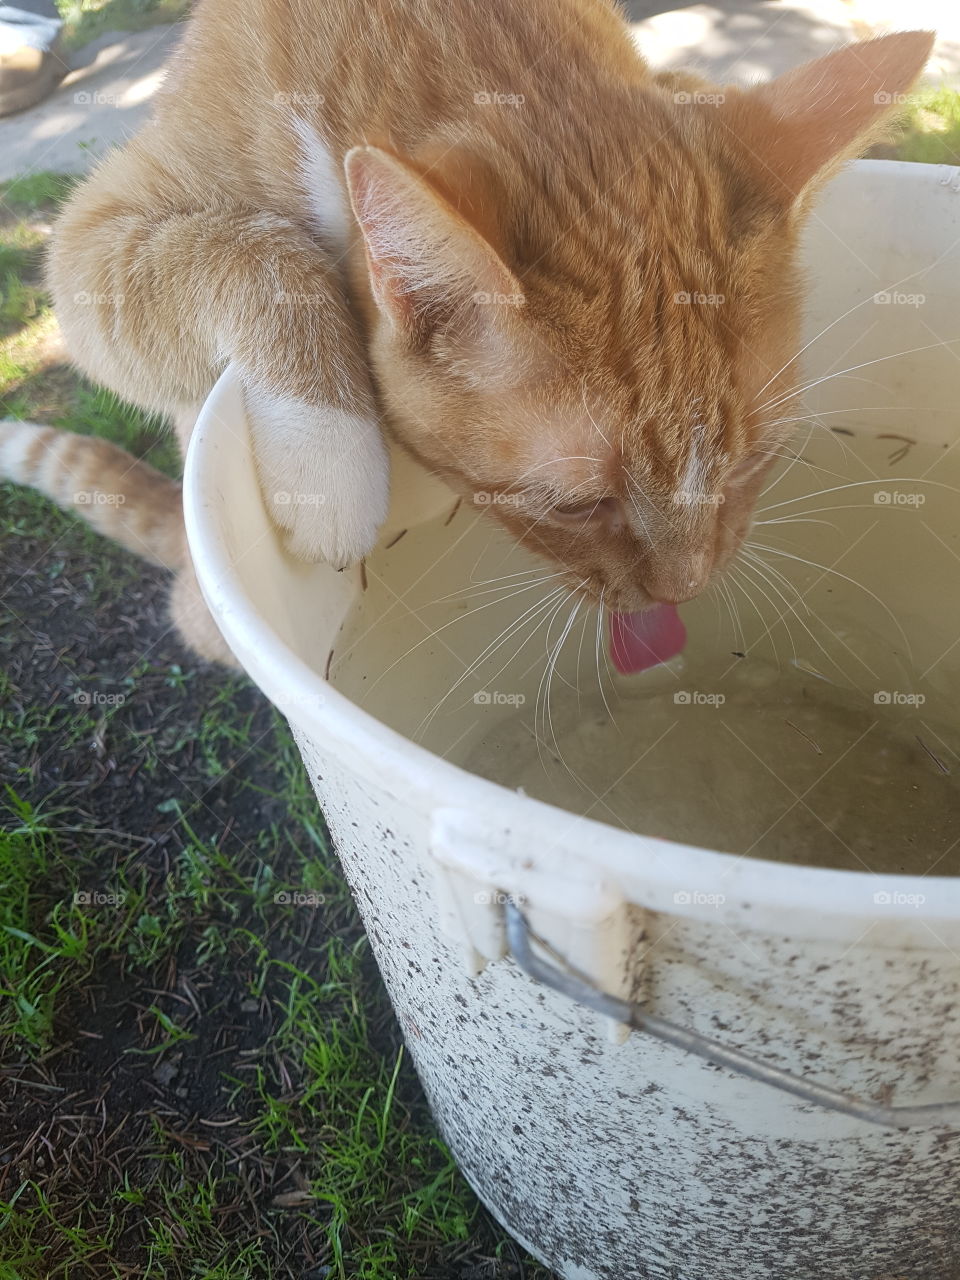 Carl the cat knows it's important to stay hydrated on these hot summer days. Be like Carl and drink lots of water kids!